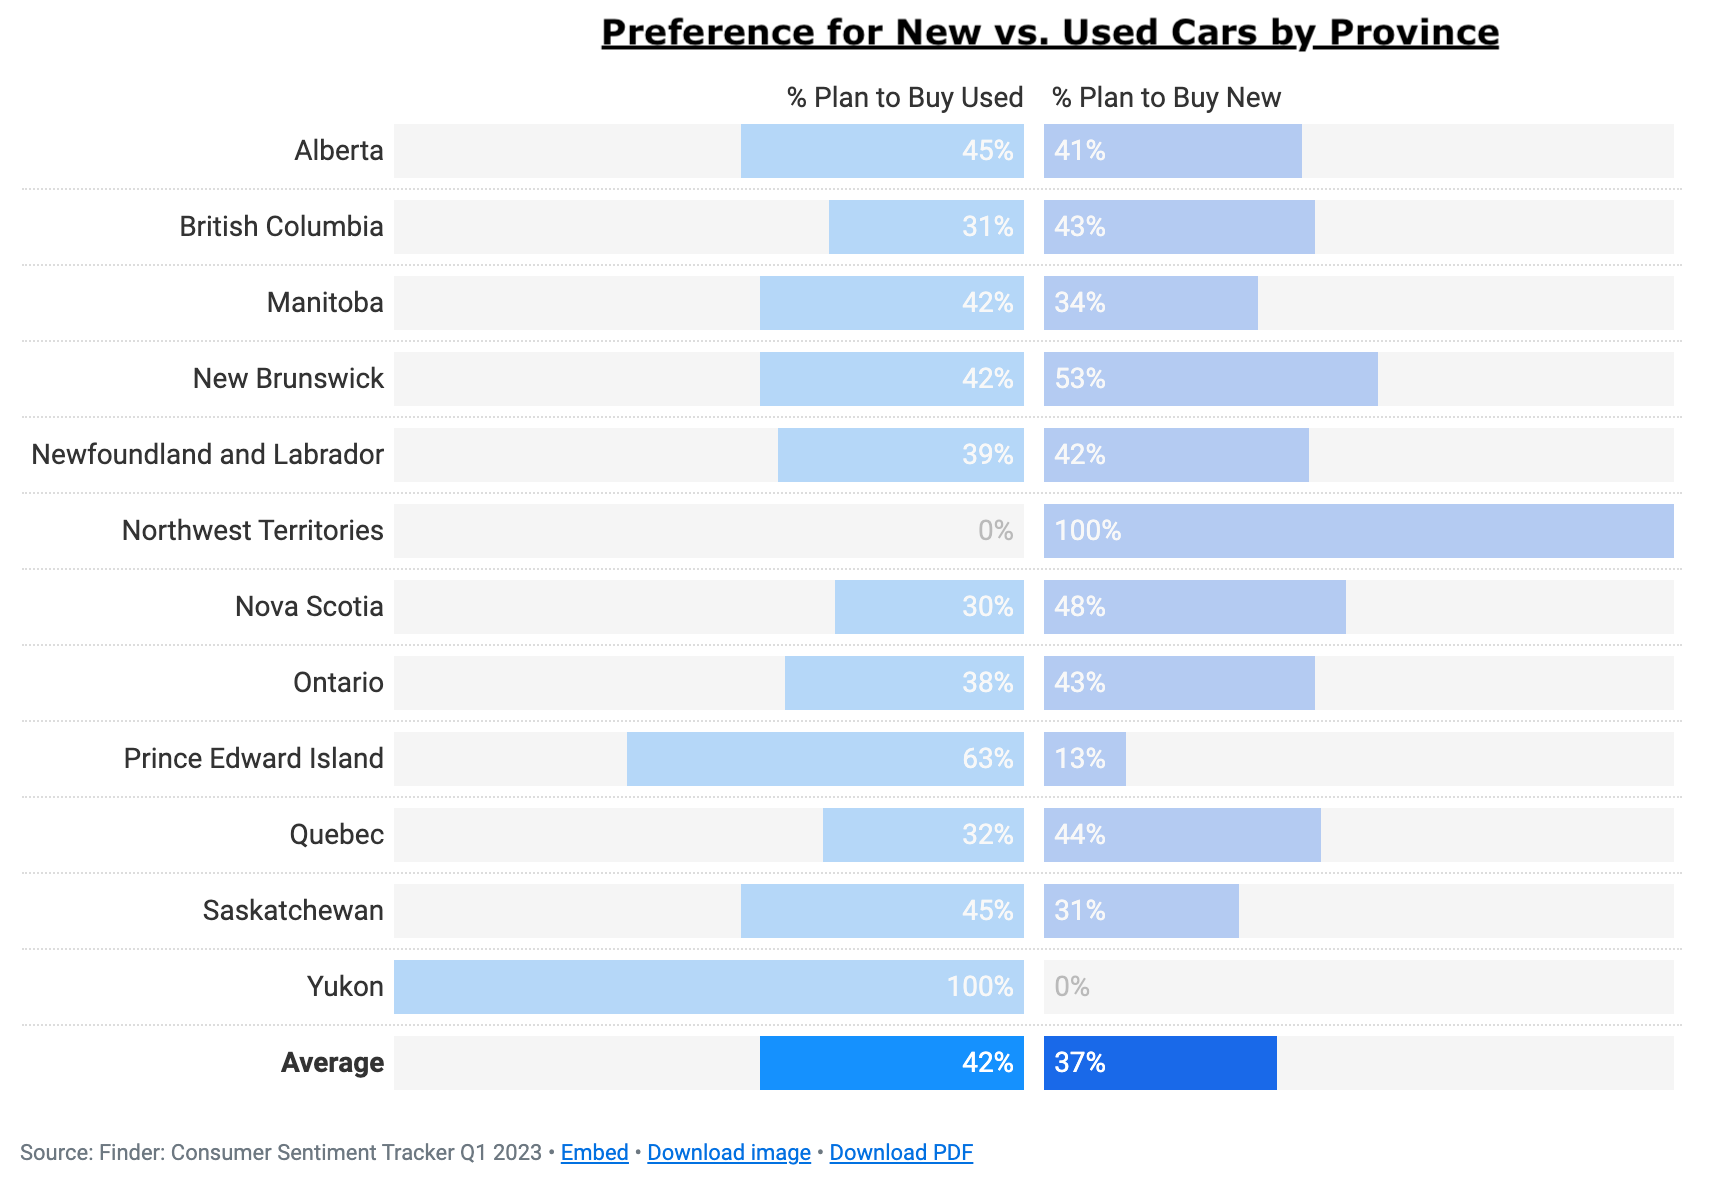 Chart showing preferences for new vs. used cars across provinces.